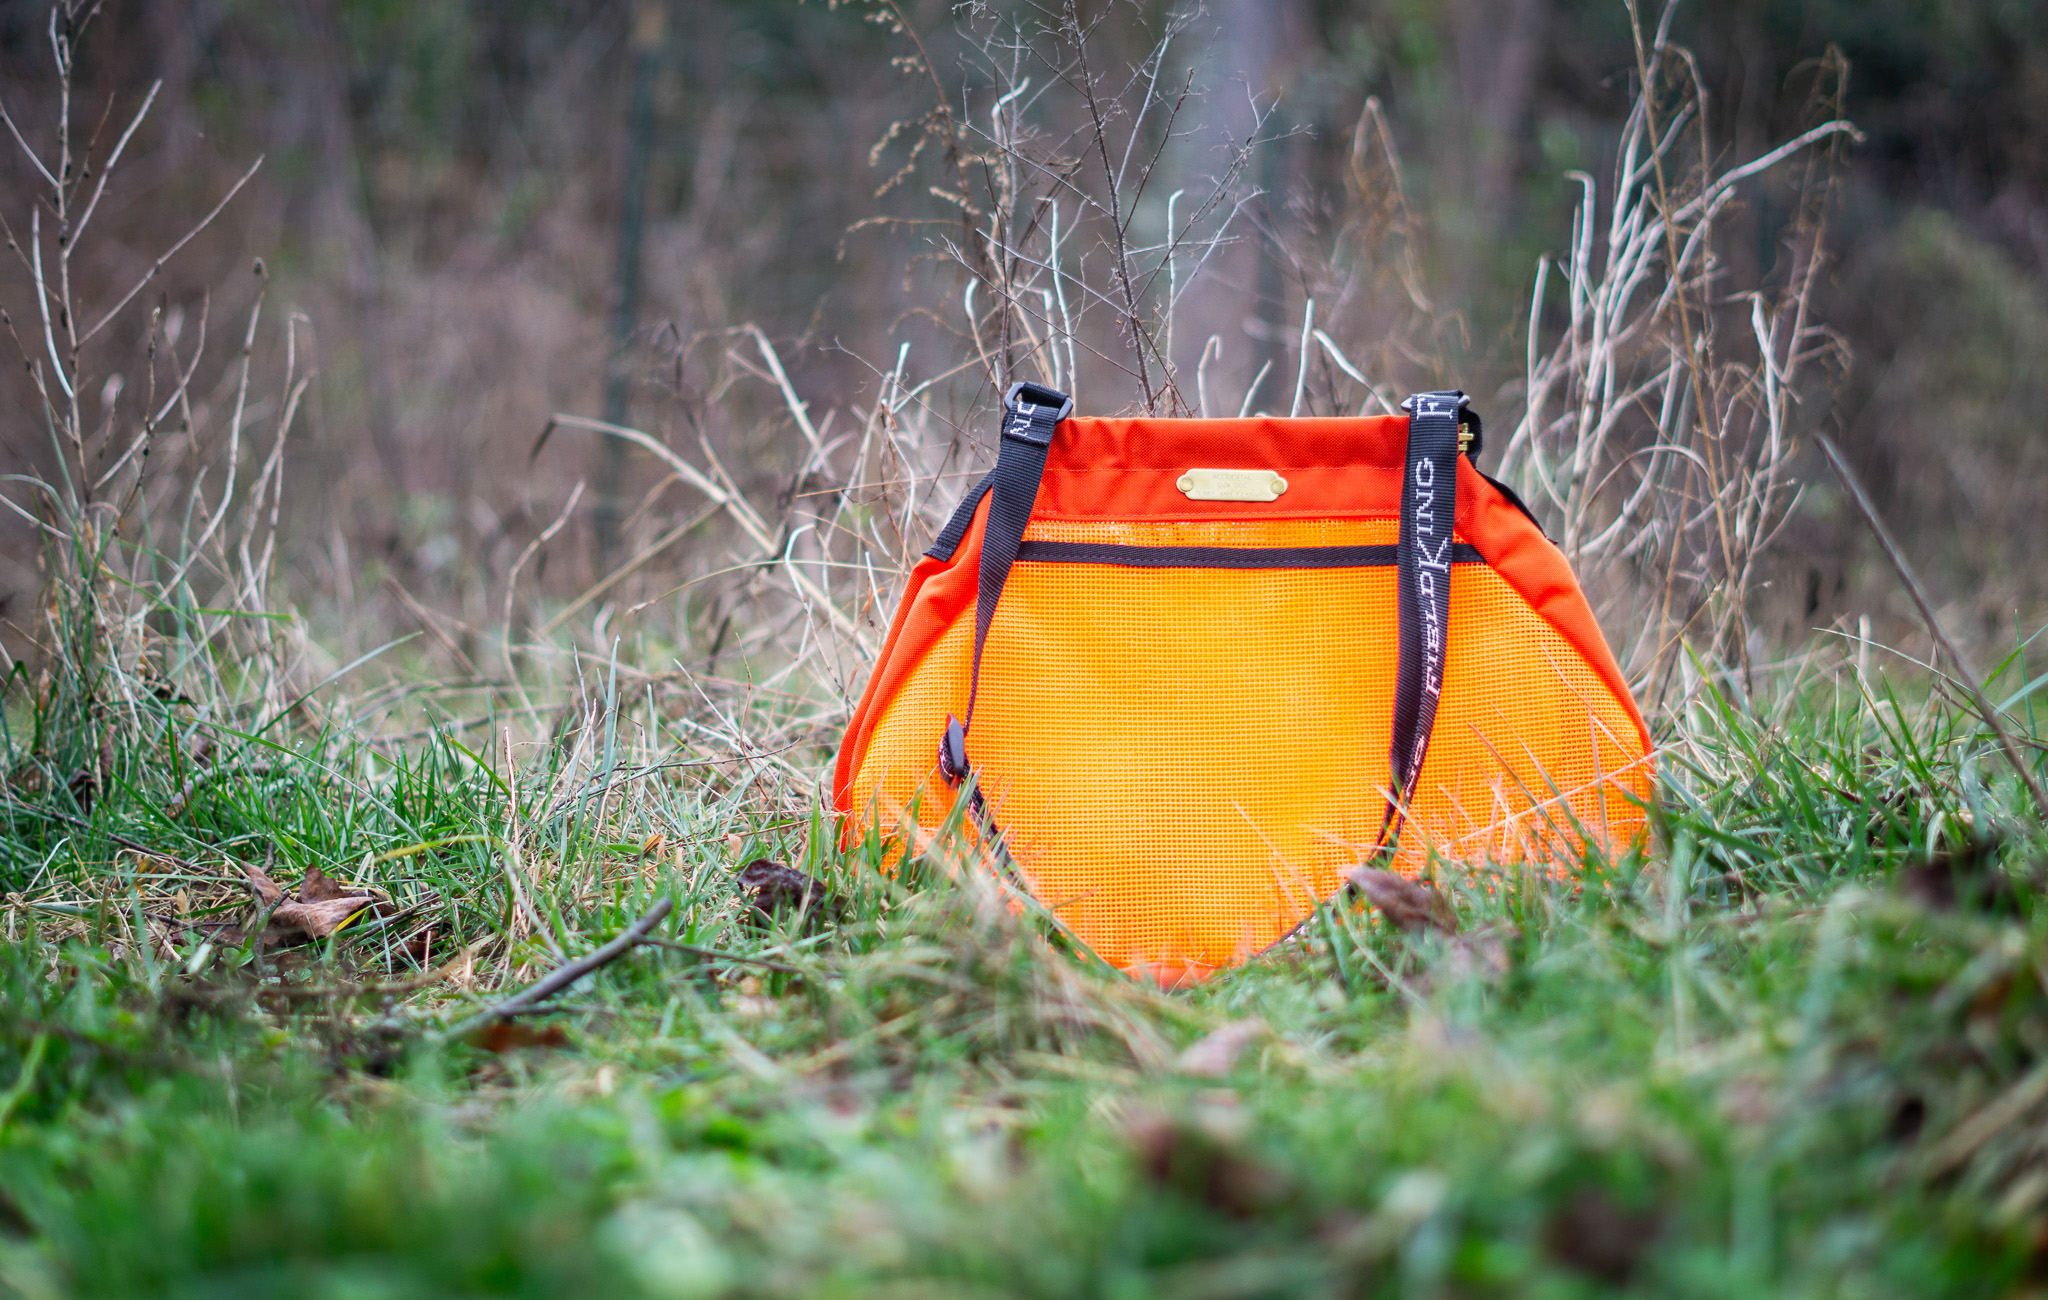 Product Review: FieldKing Game Steward’s Bird Bag